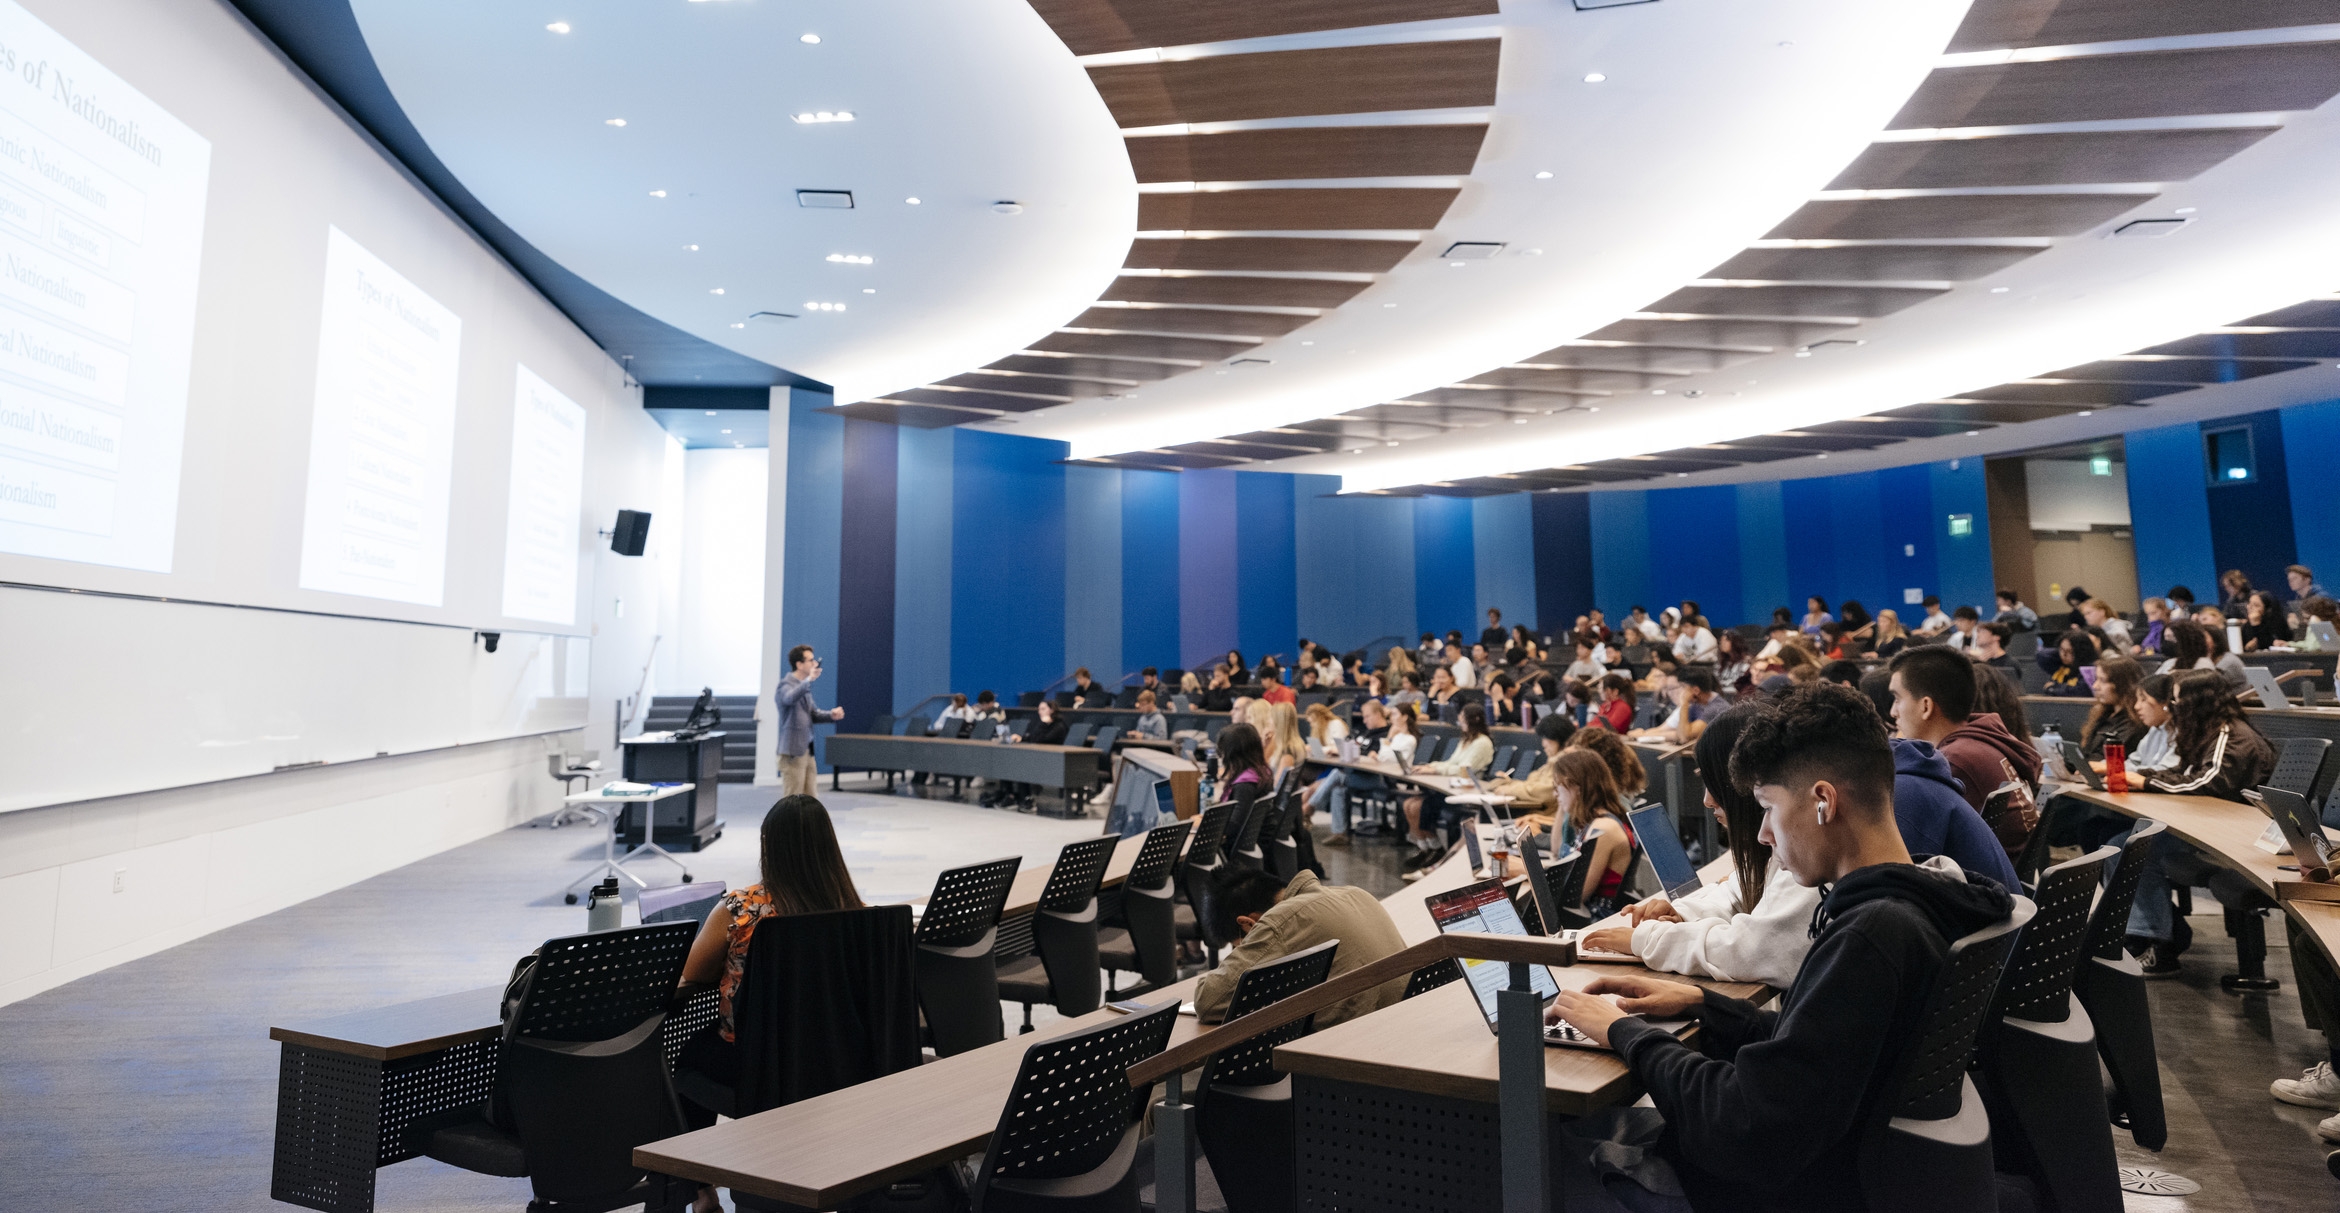 Diverse group of students listening to a lecture in a modern lecture hall